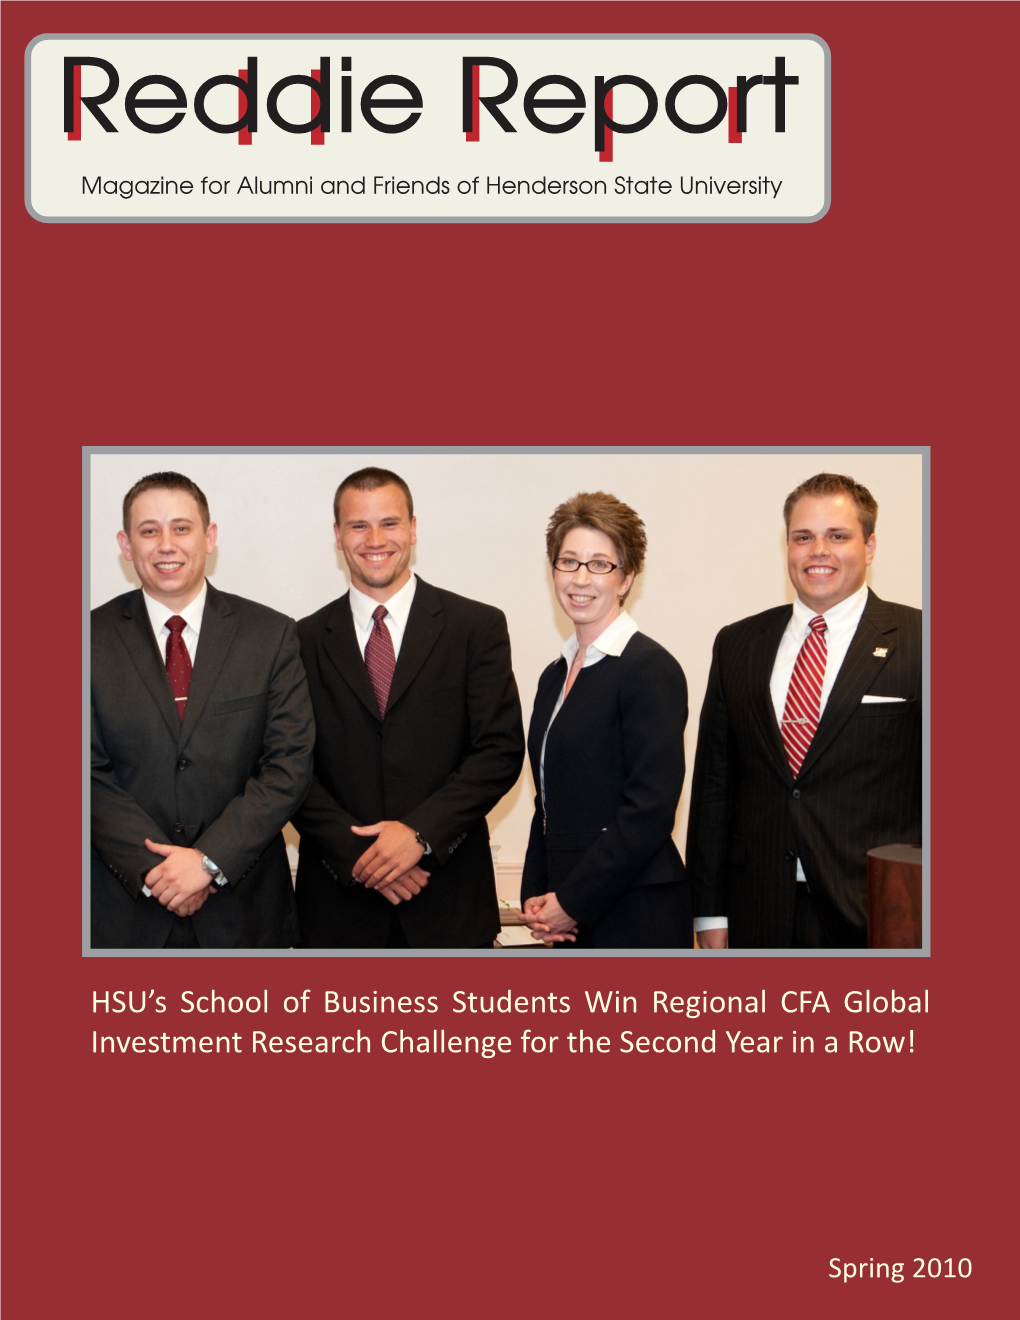 Reddie Report Magazine for Alumni and Friends of Henderson State University